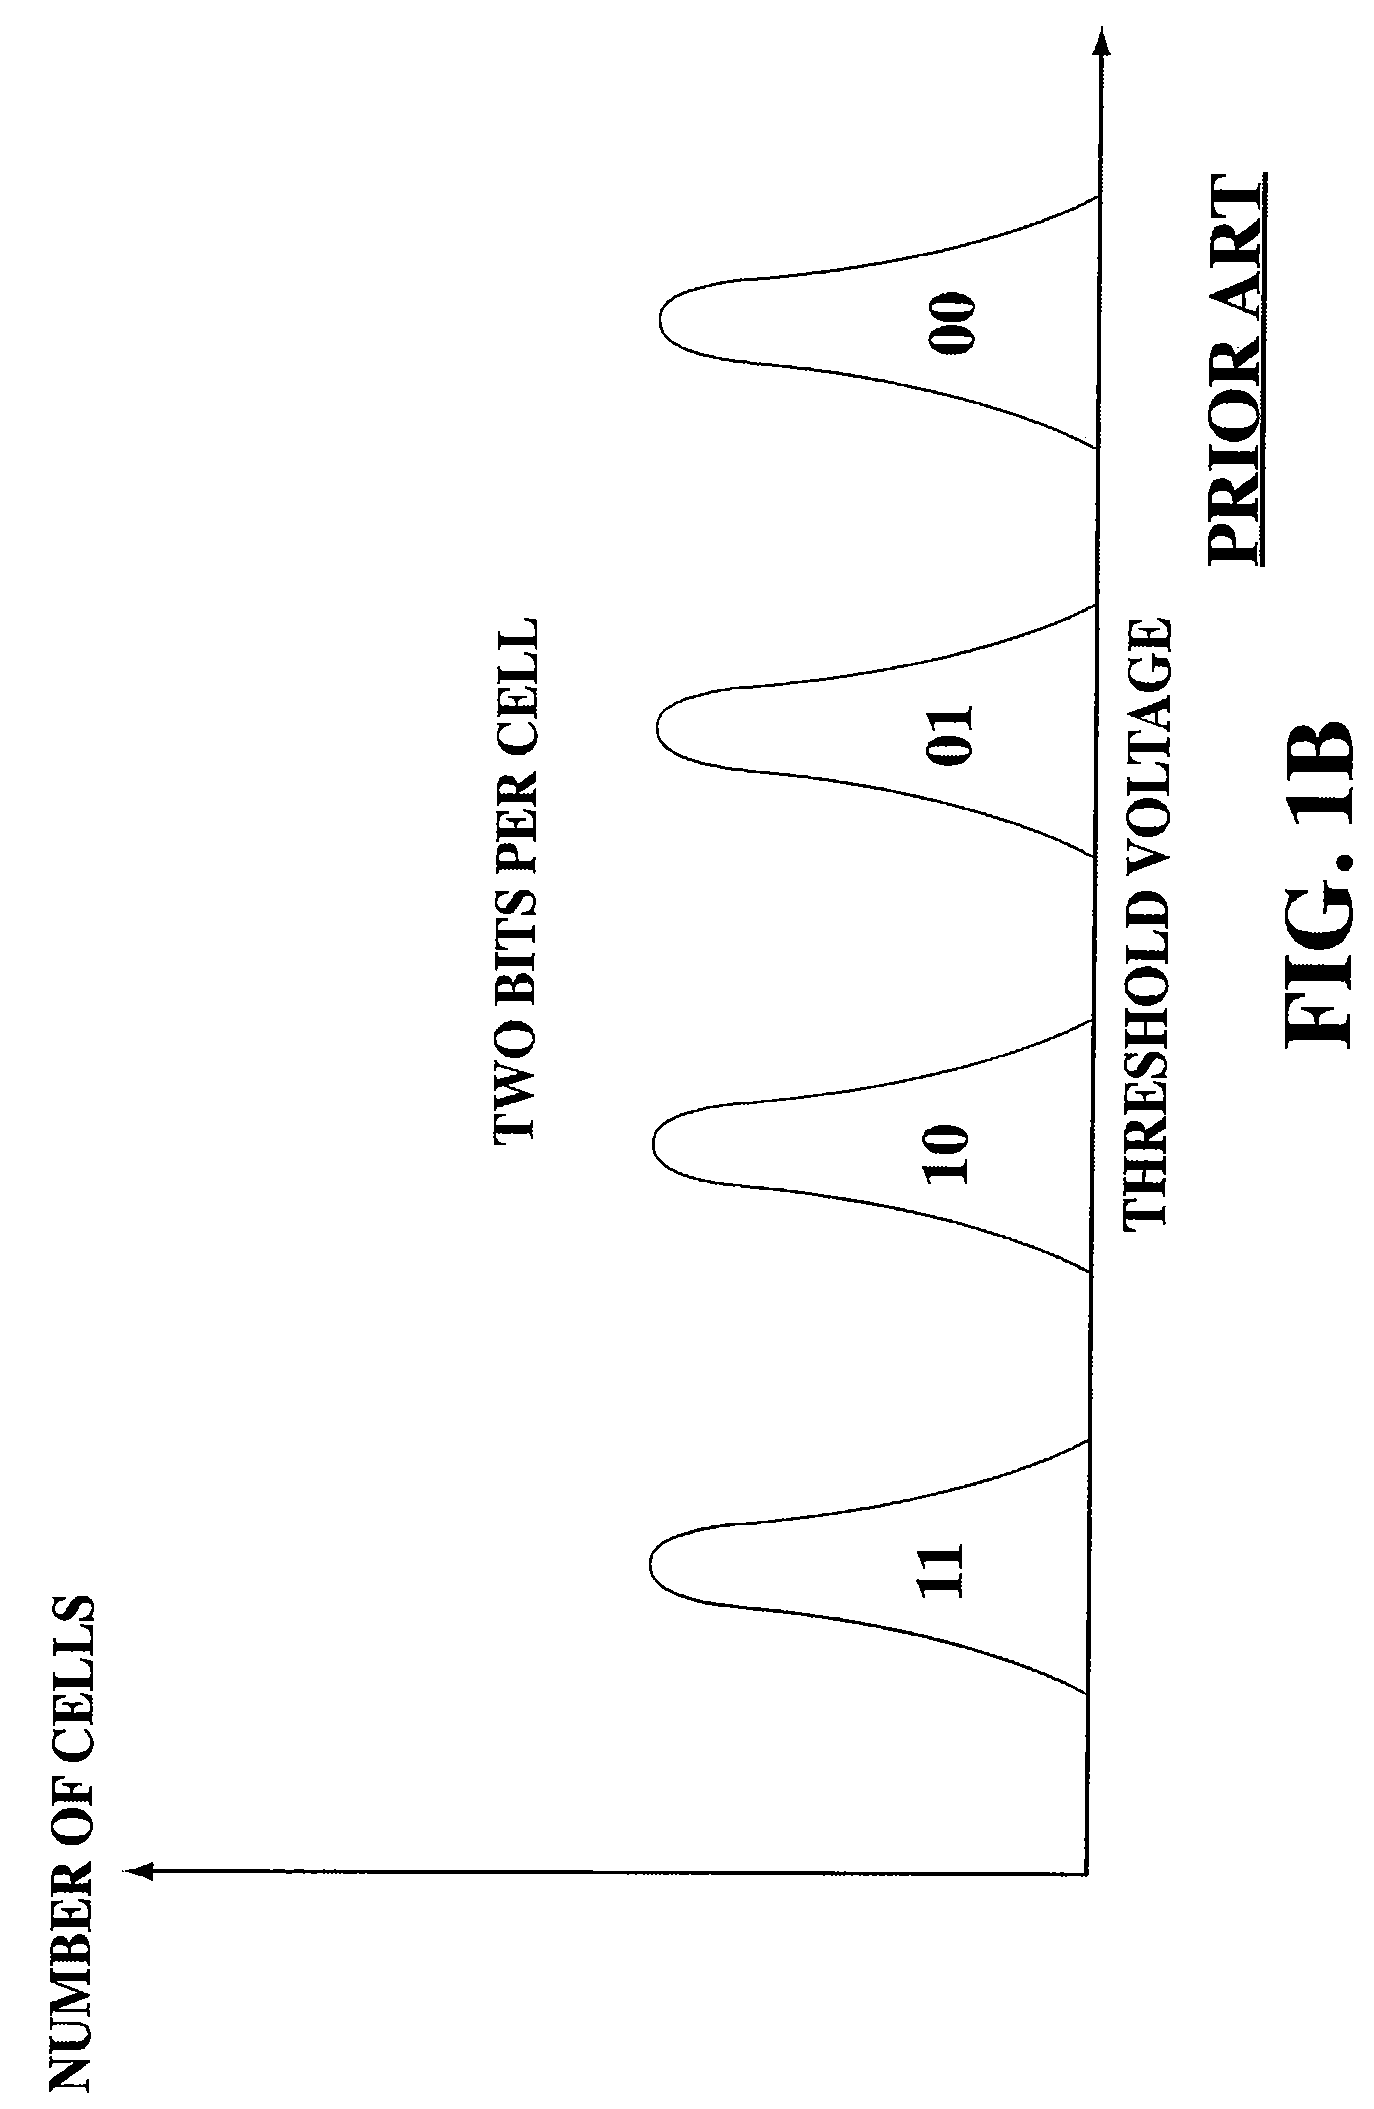 NAND flash memory controller exporting a NAND interface